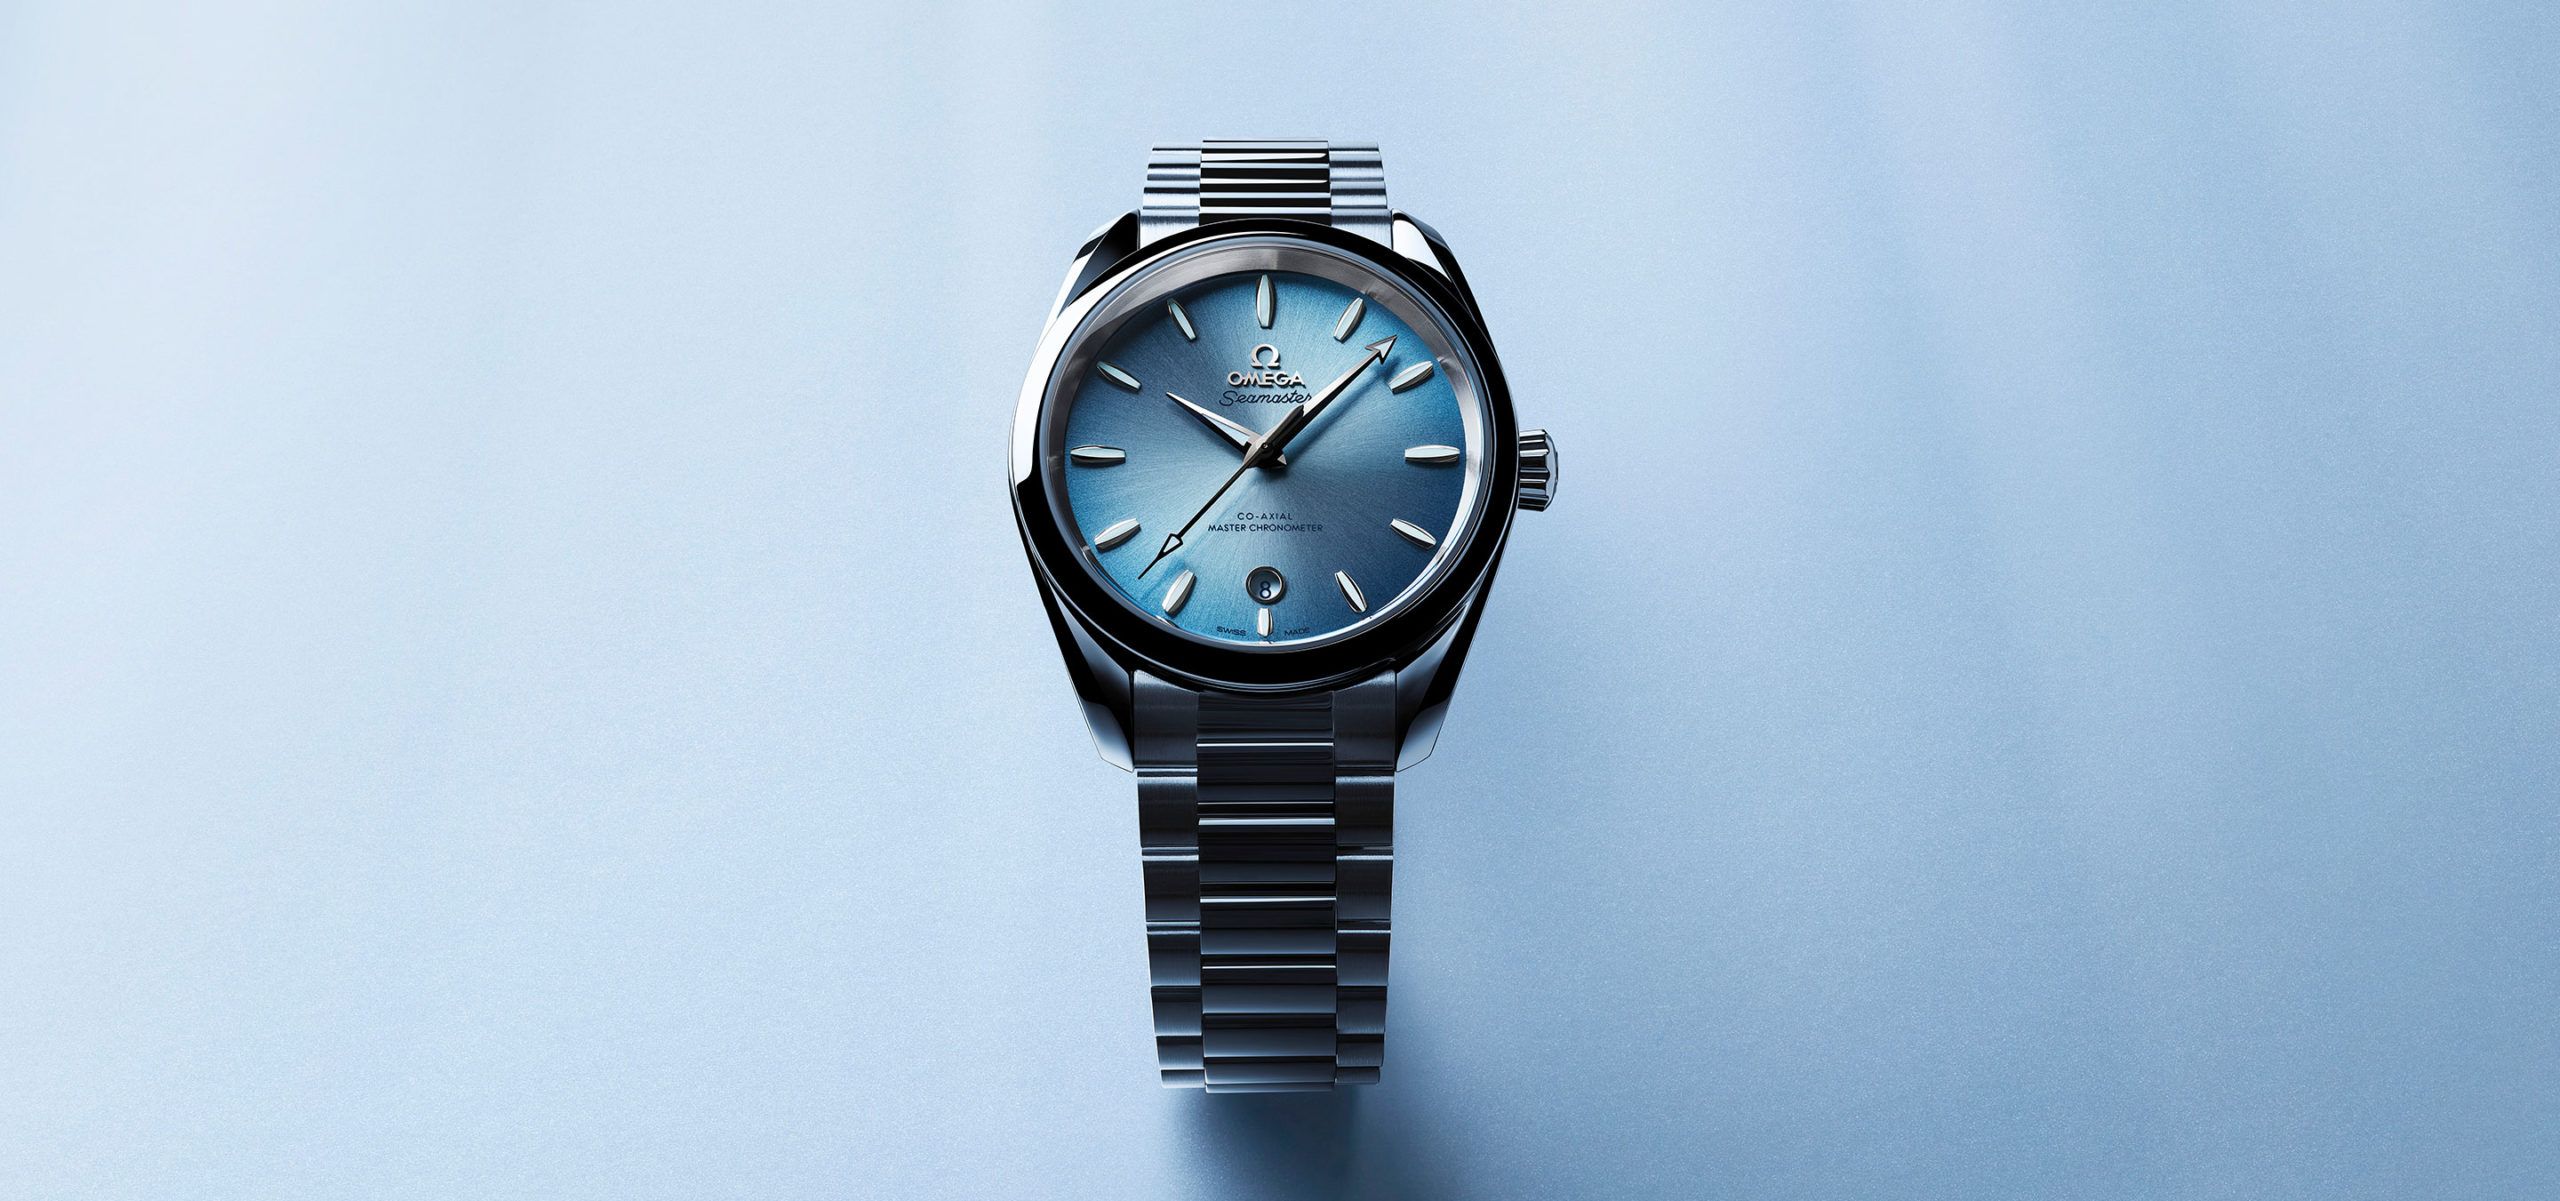 Glacial Blue Is The Warmest Colour: Presenting Watches With Ice Blue Dials